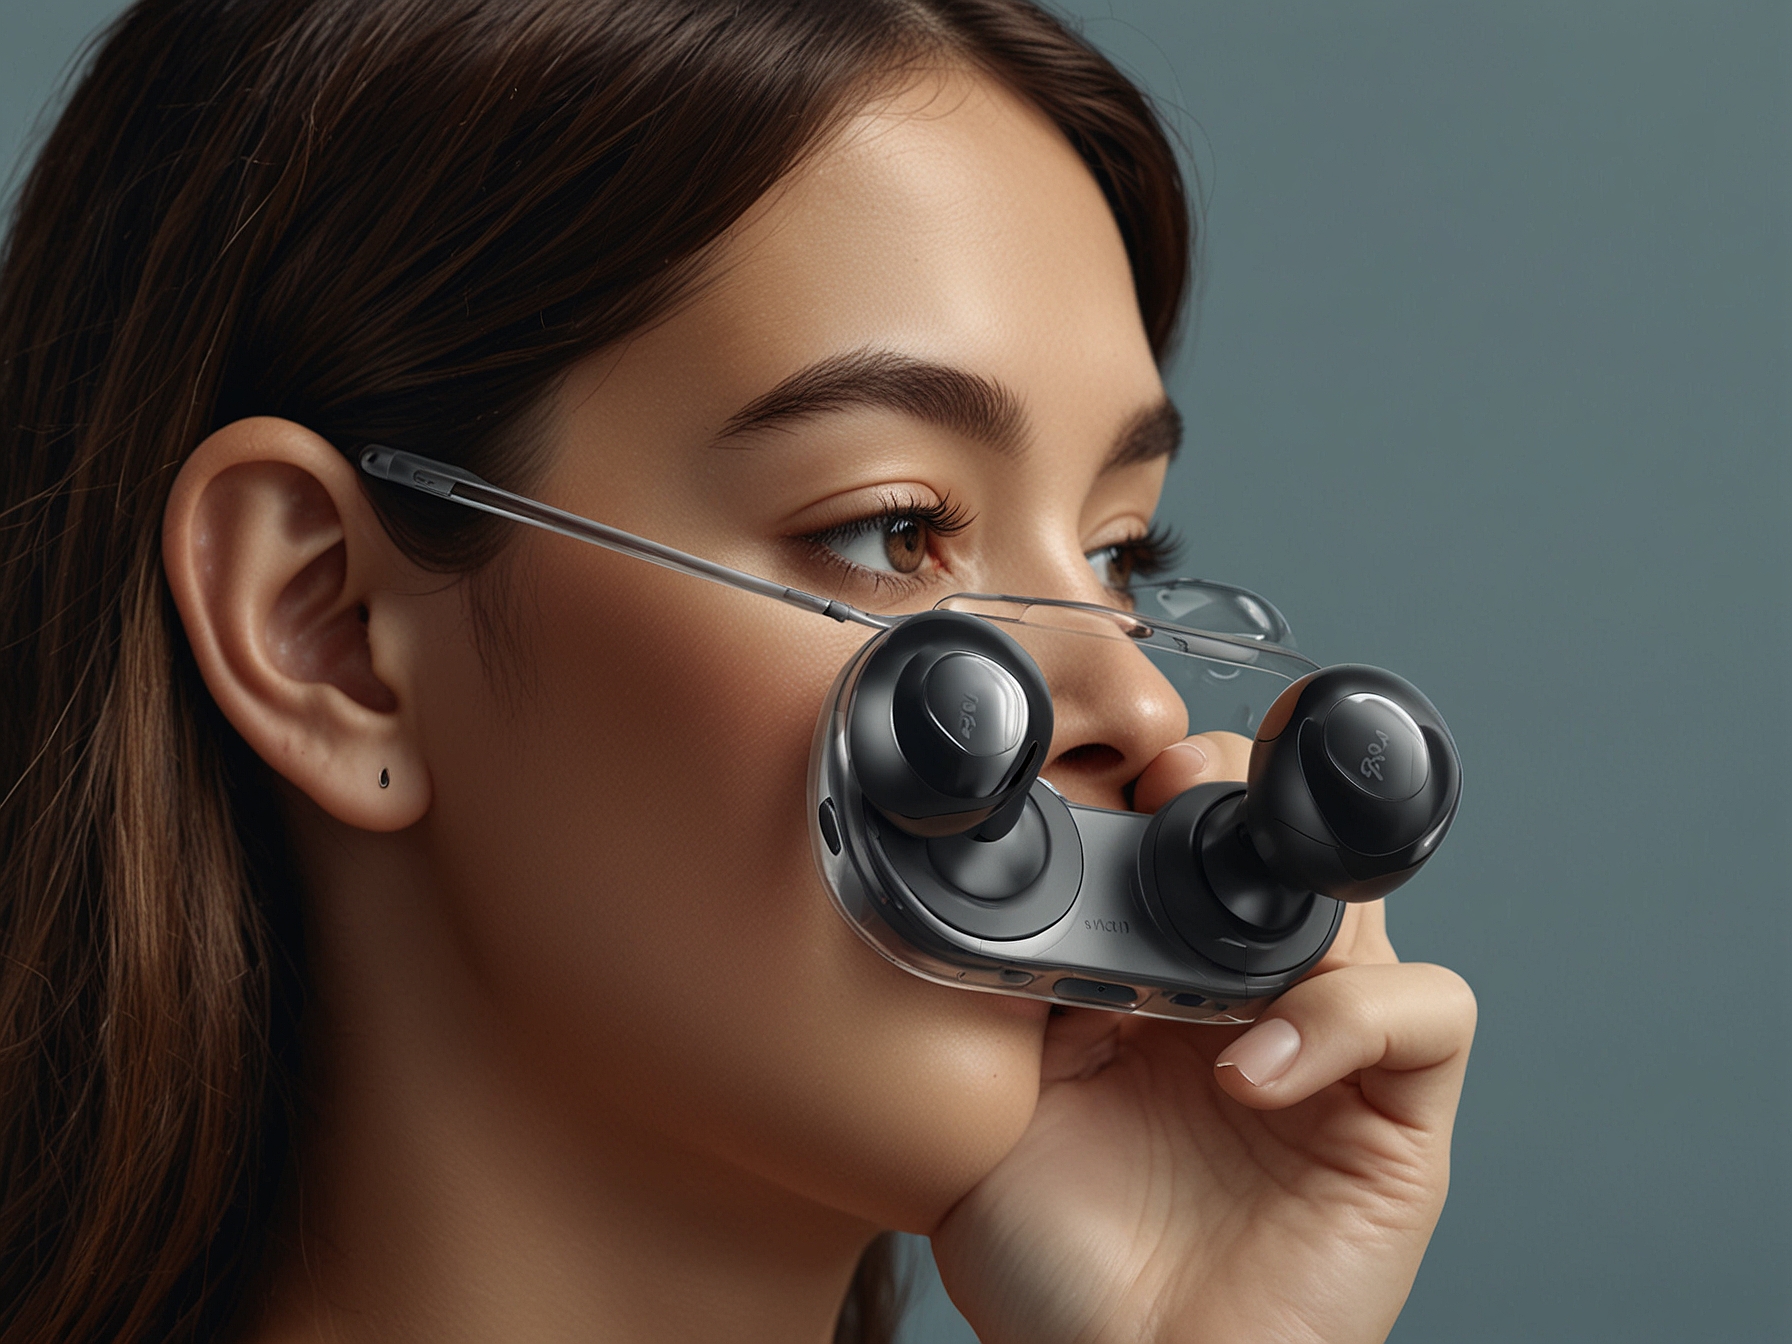 The first image showcases the Samsung Galaxy Buds 3's transparent charging case, providing a clear view of the earbuds inside and highlighting its modern, sleek design.